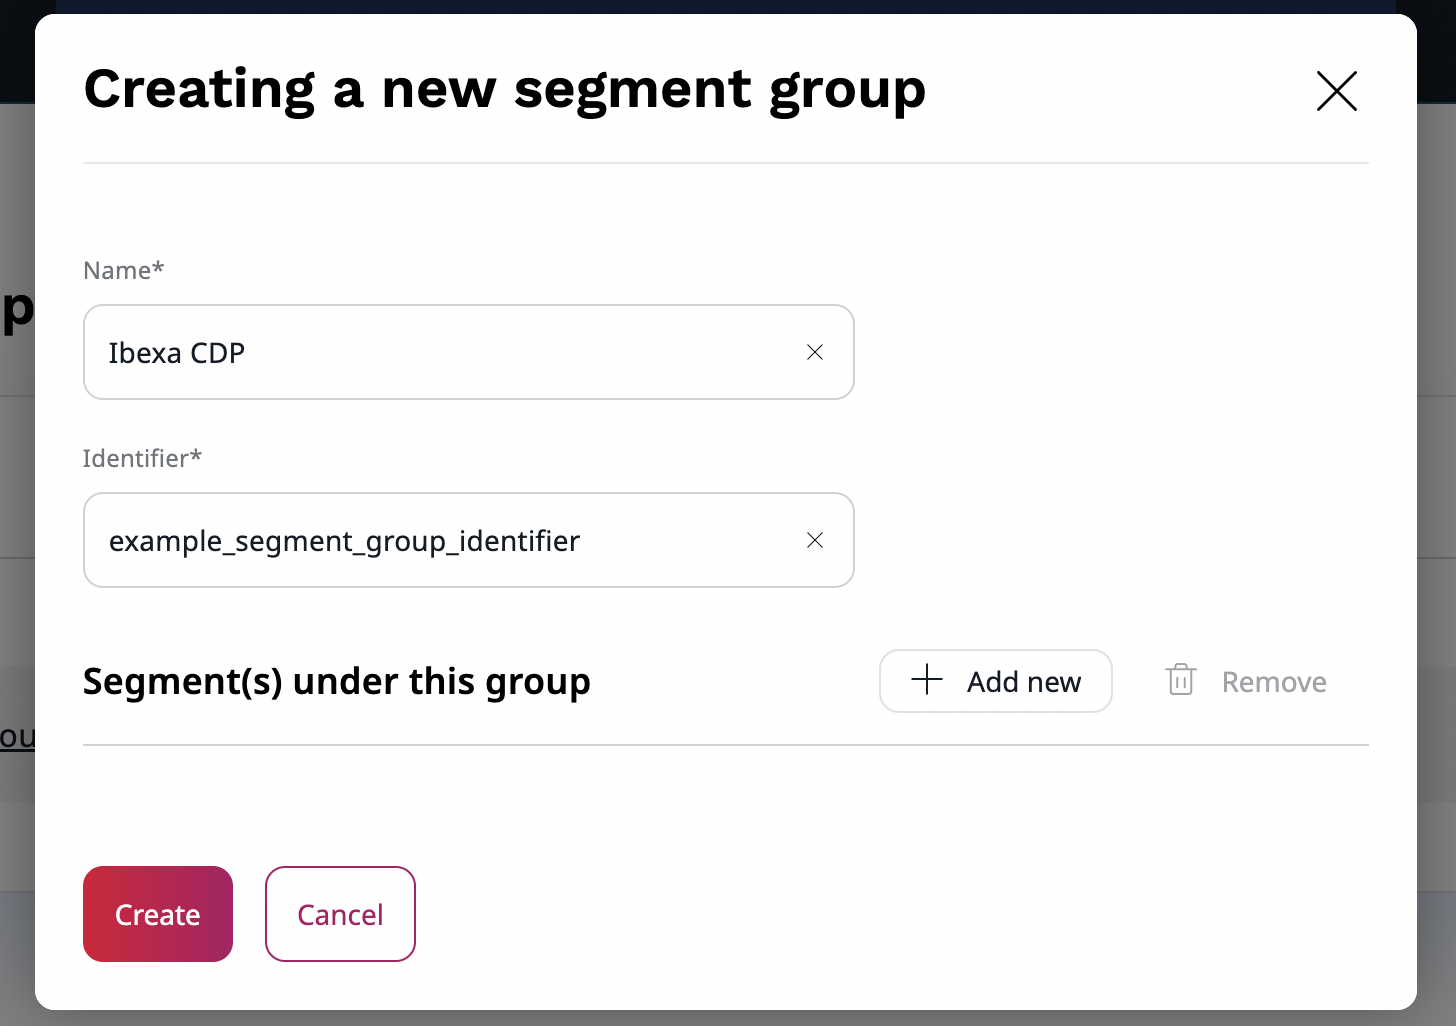 Creating a new segment group